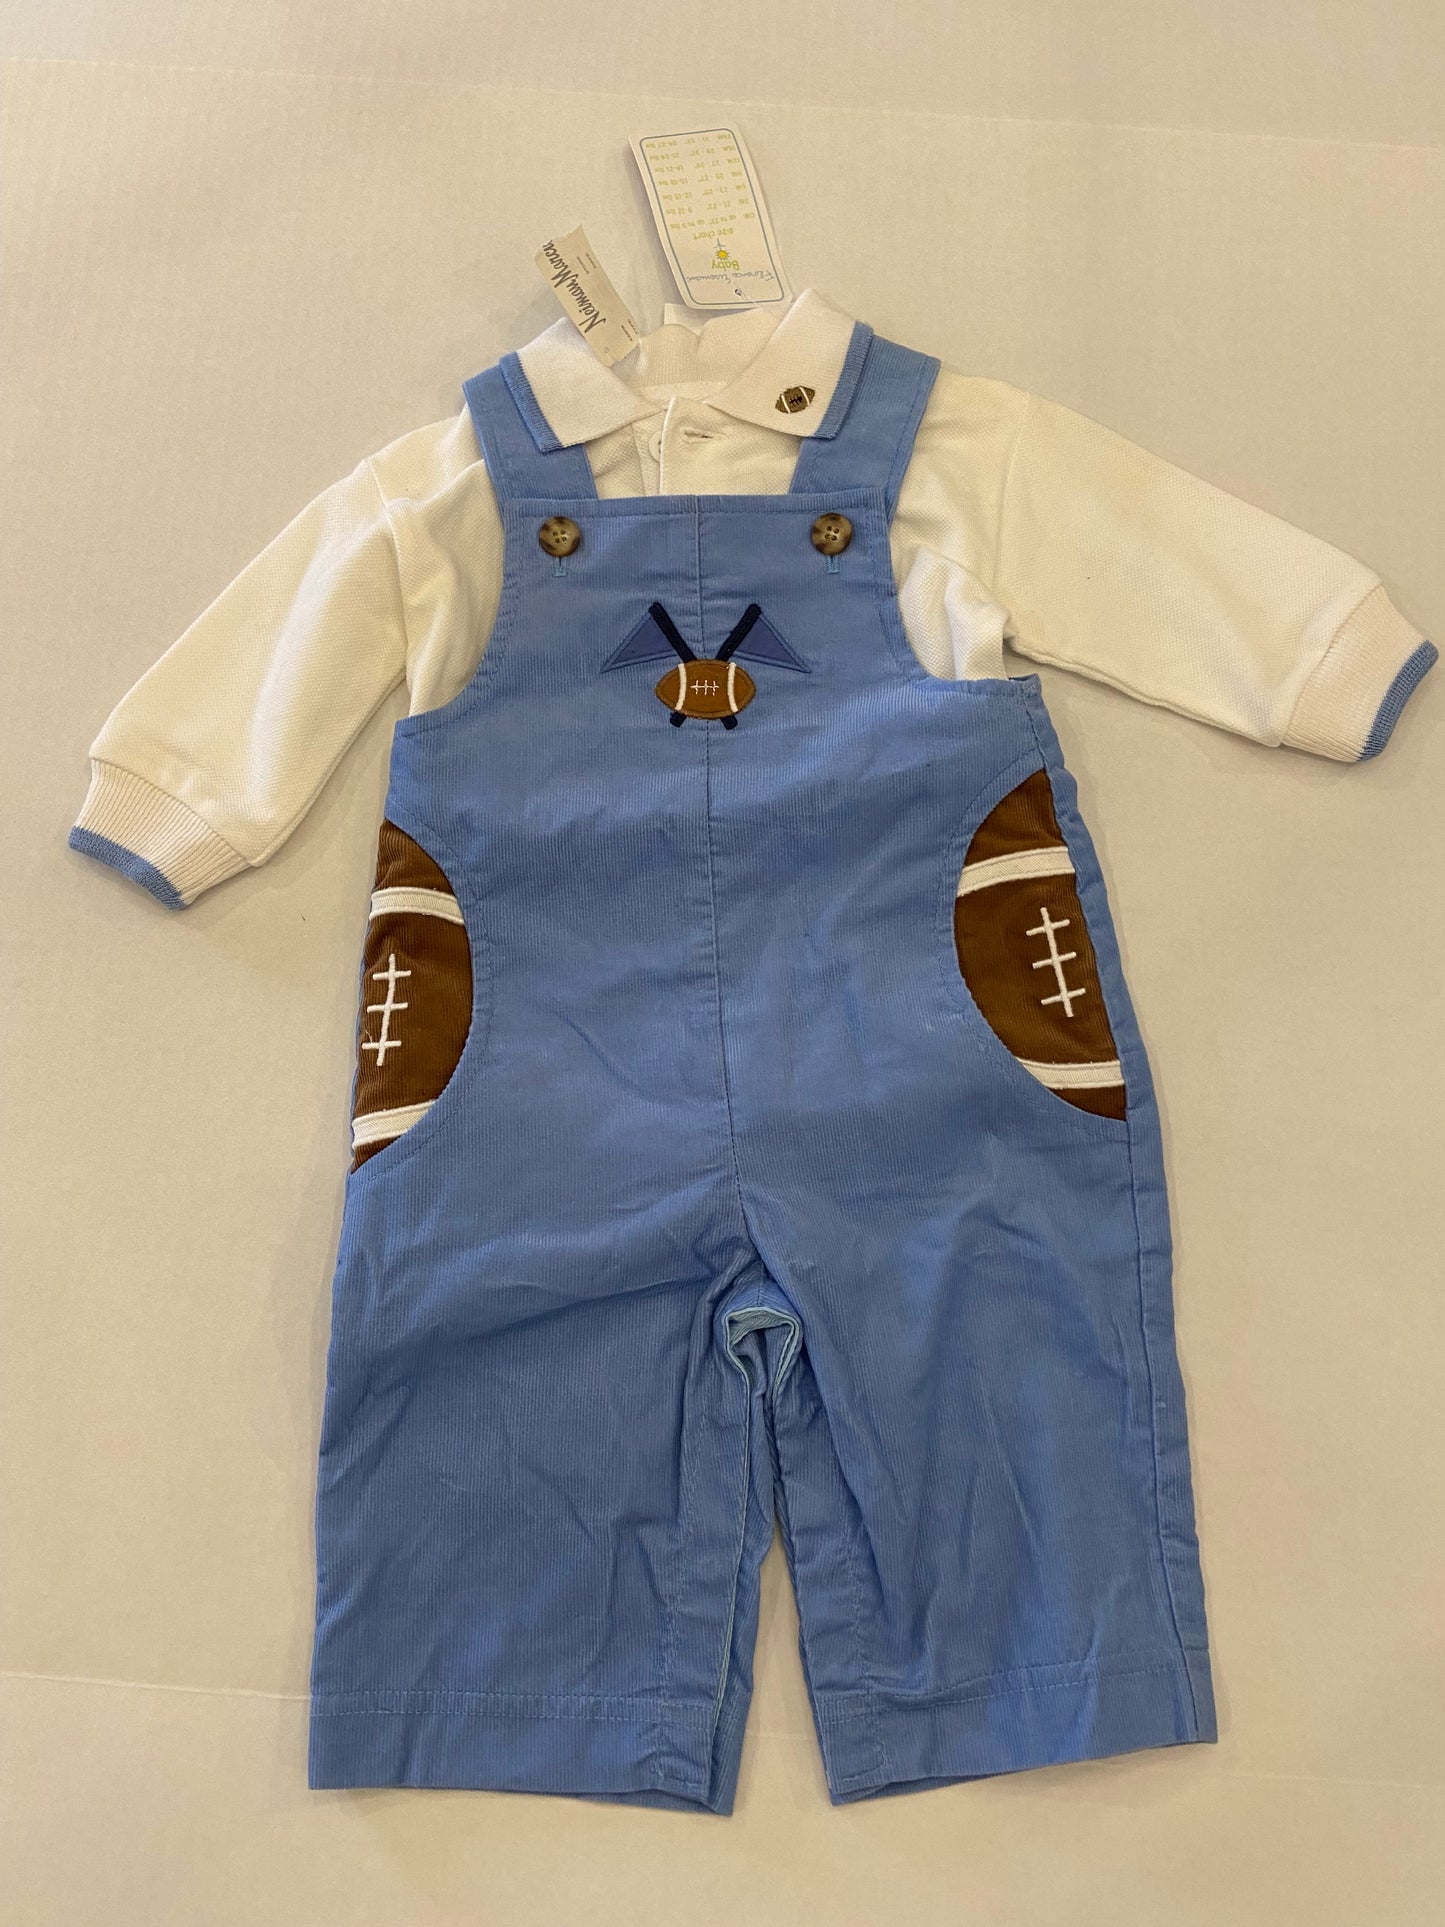 Boys 6m Florence Eiseman NWT Footbal outfit from Nieman Marcus